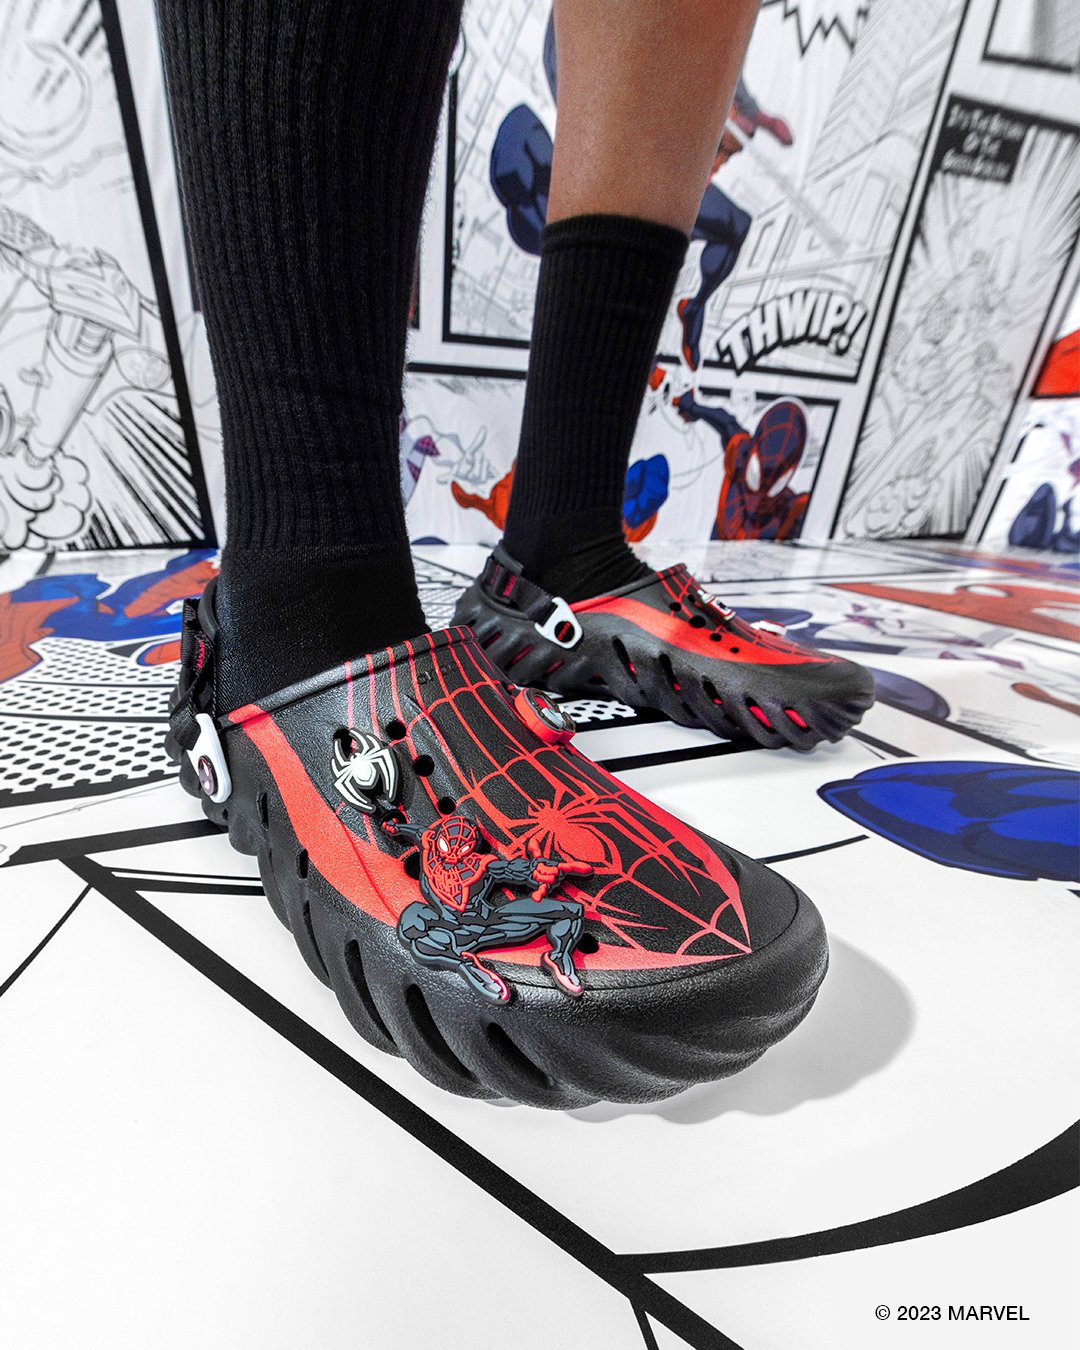 Forholdsvis Udvalg opdagelse Foot Locker Canada on Twitter: "Sport Mode &lt; Spider Mode 🕷️🕸️ The # Crocs x Spiderman collection is launching 5/25 in men's &amp; kid's sizing  online &amp; in select stores exclusively at Foot